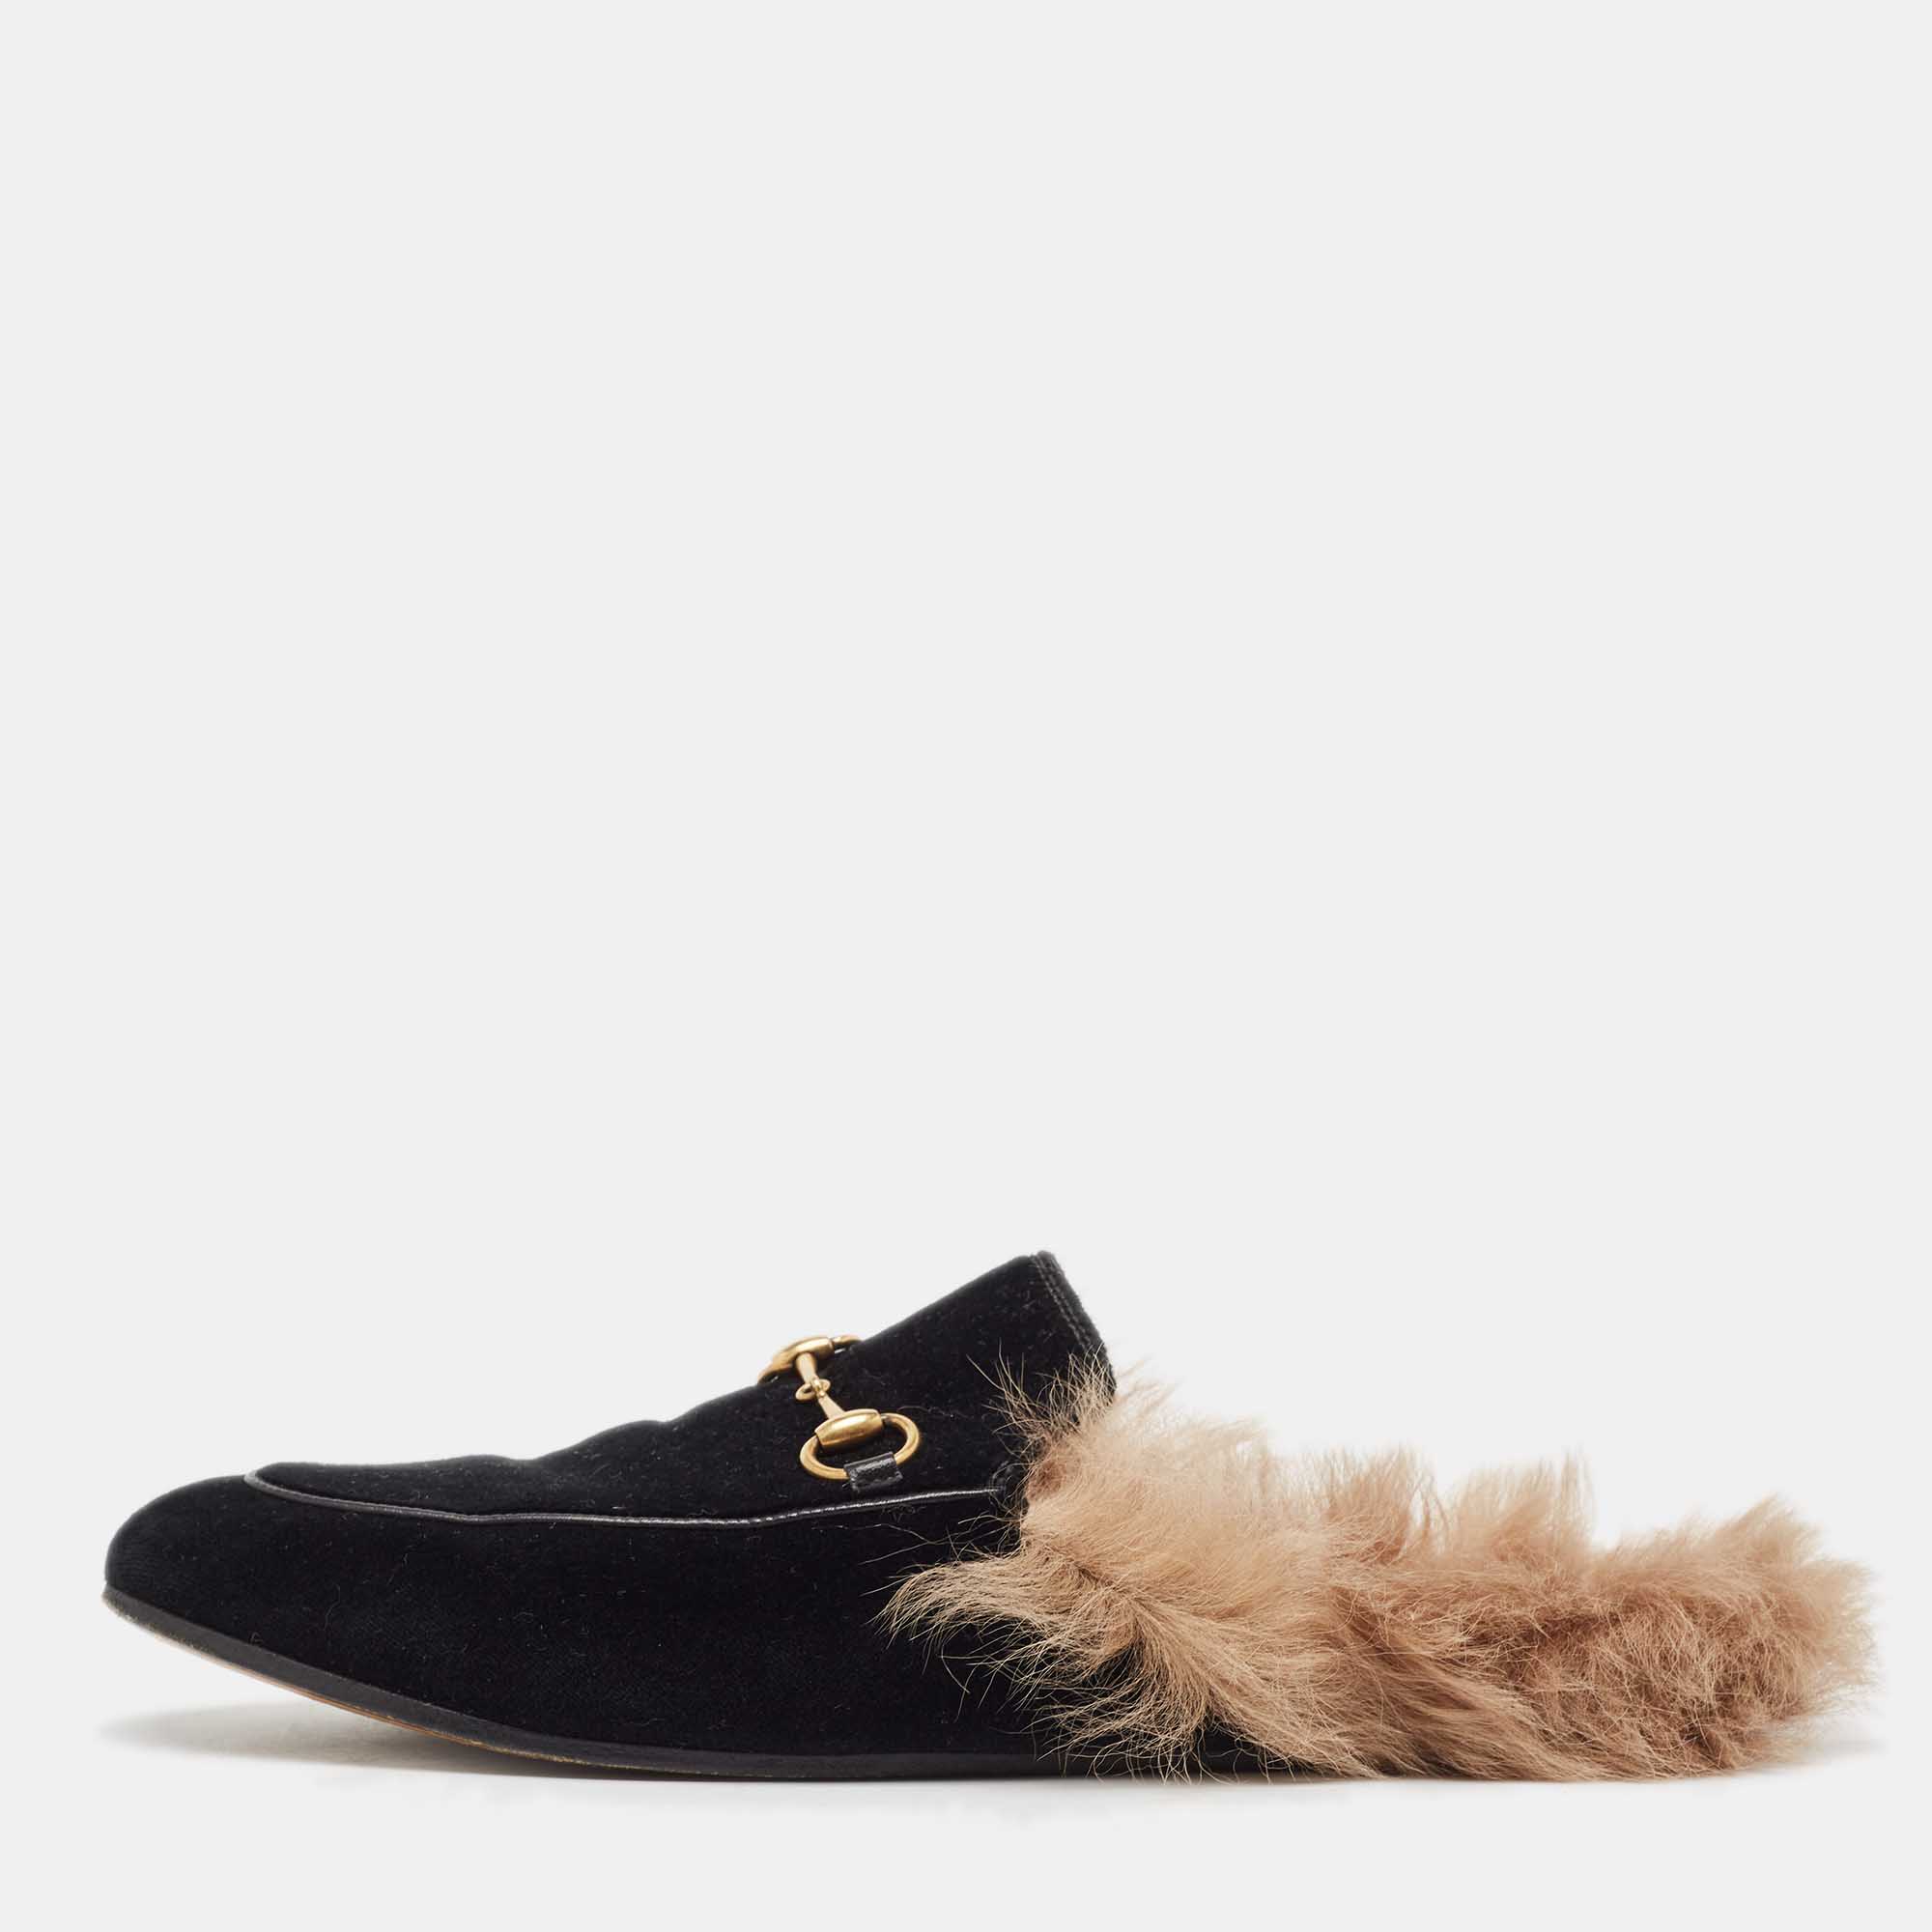 Pre-owned Gucci Black Velvet Fur Lined Princetown Flat Mules Size 39